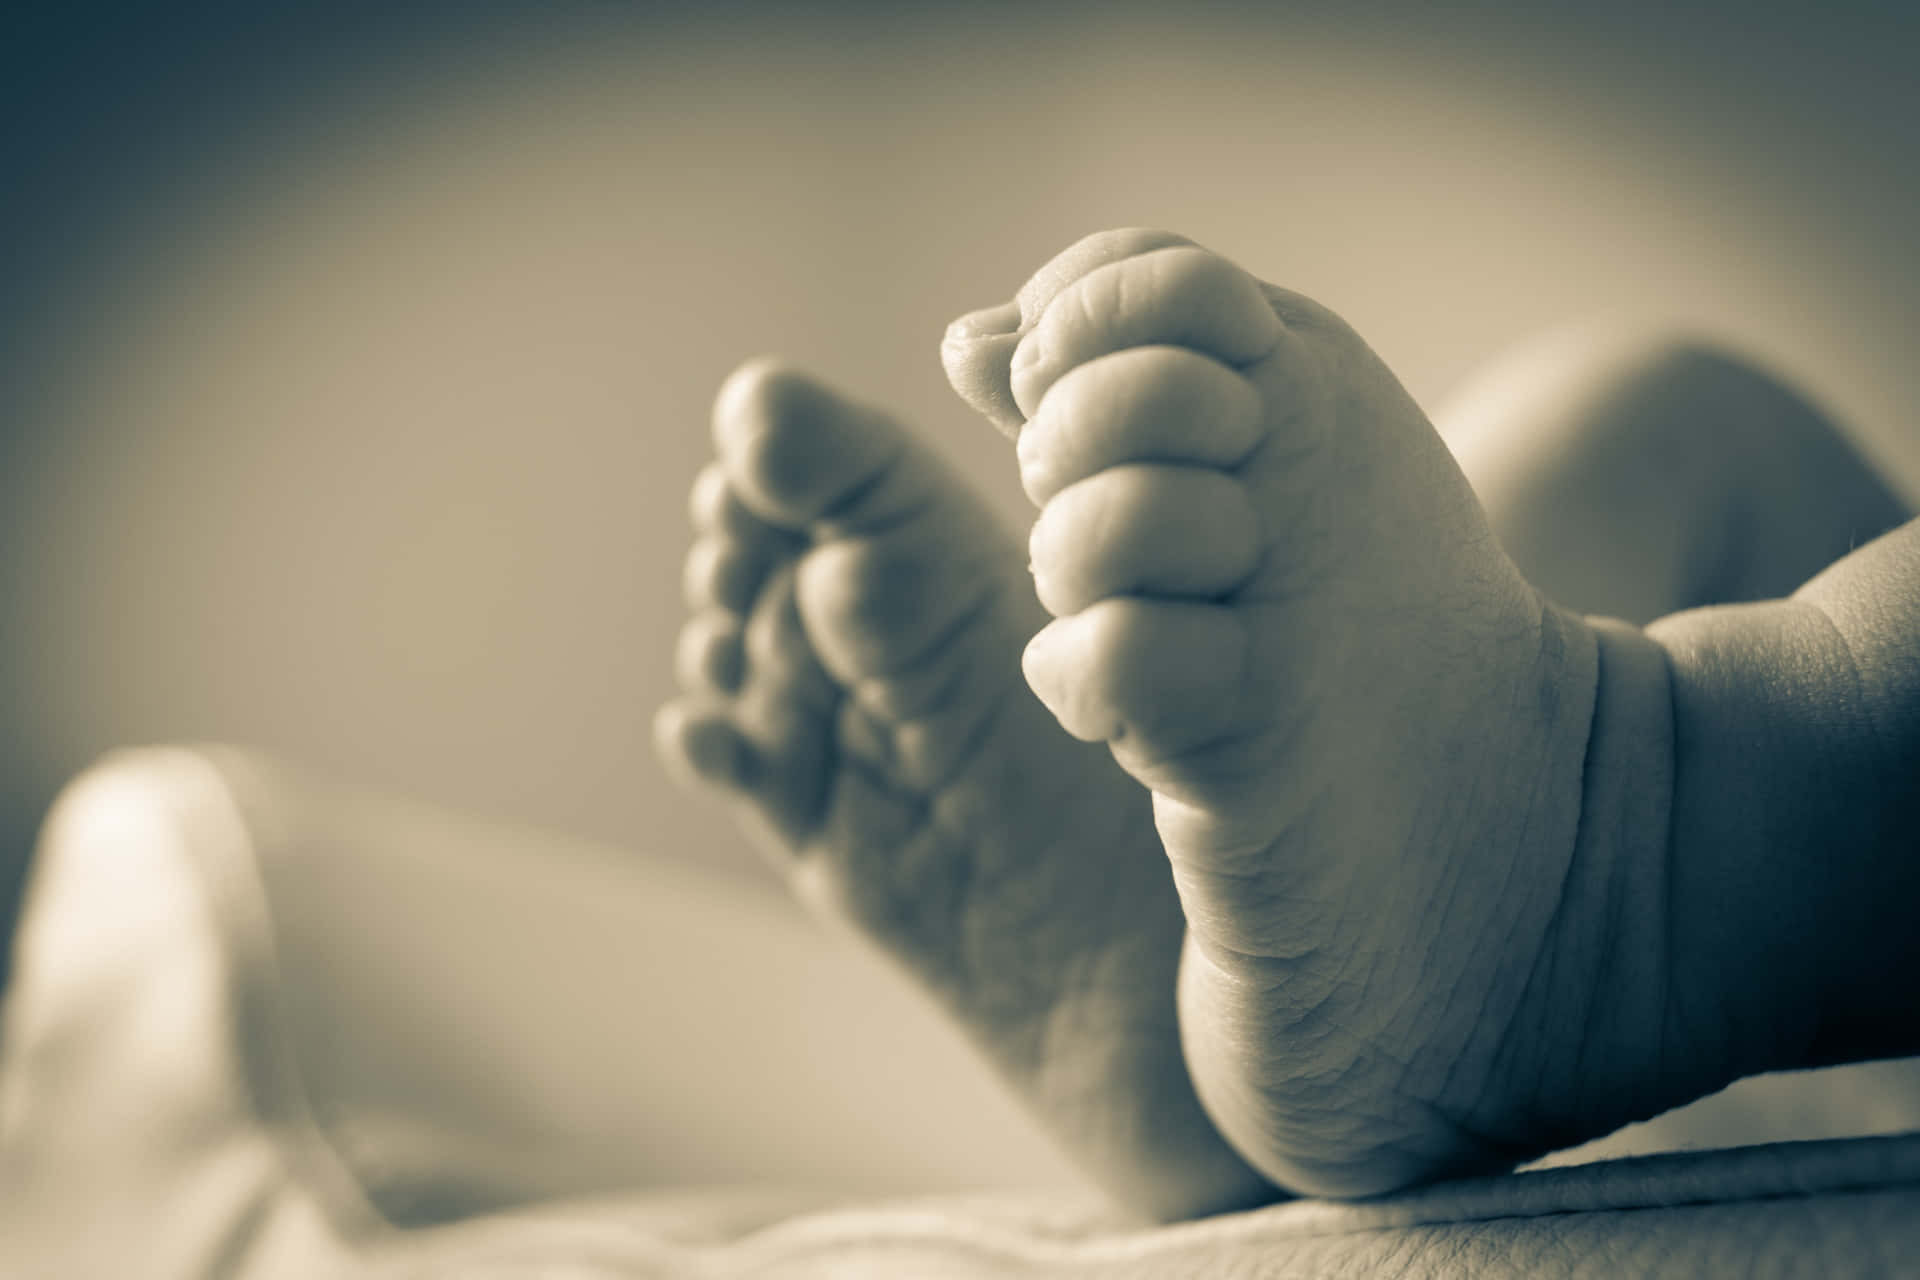 A Baby's Feet Are Shown On A Bed